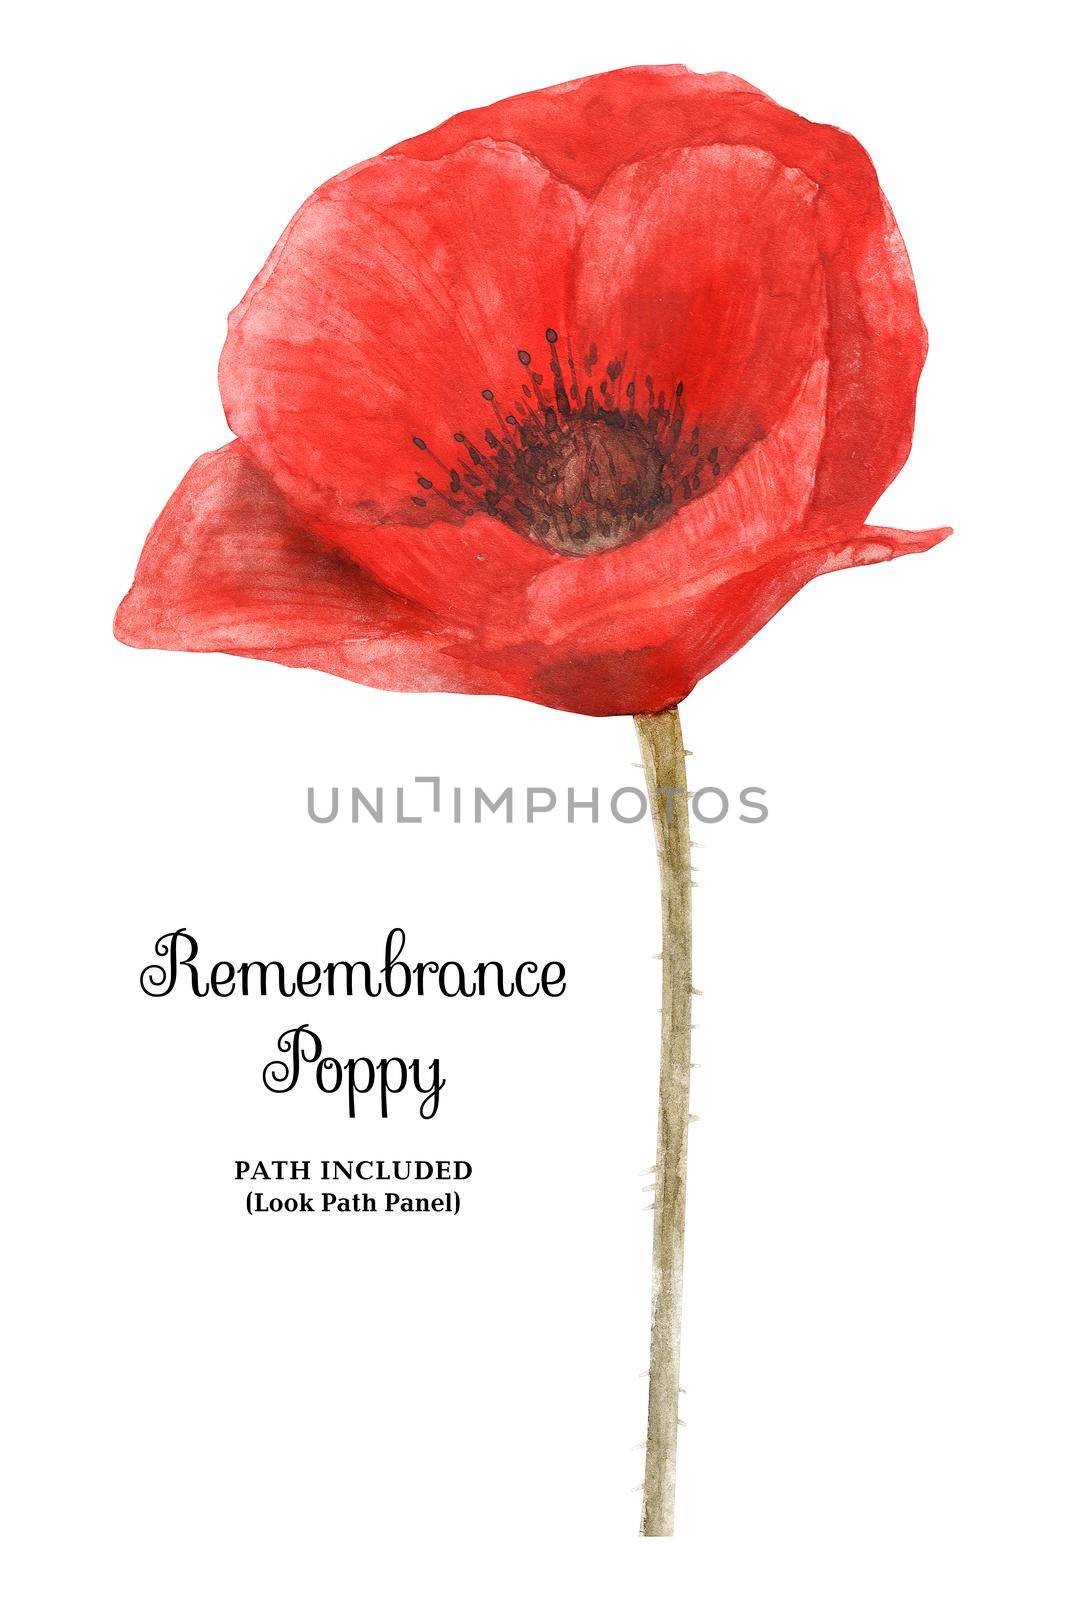 Remembrance Poppy by watercolor by Xeniasnowstorm